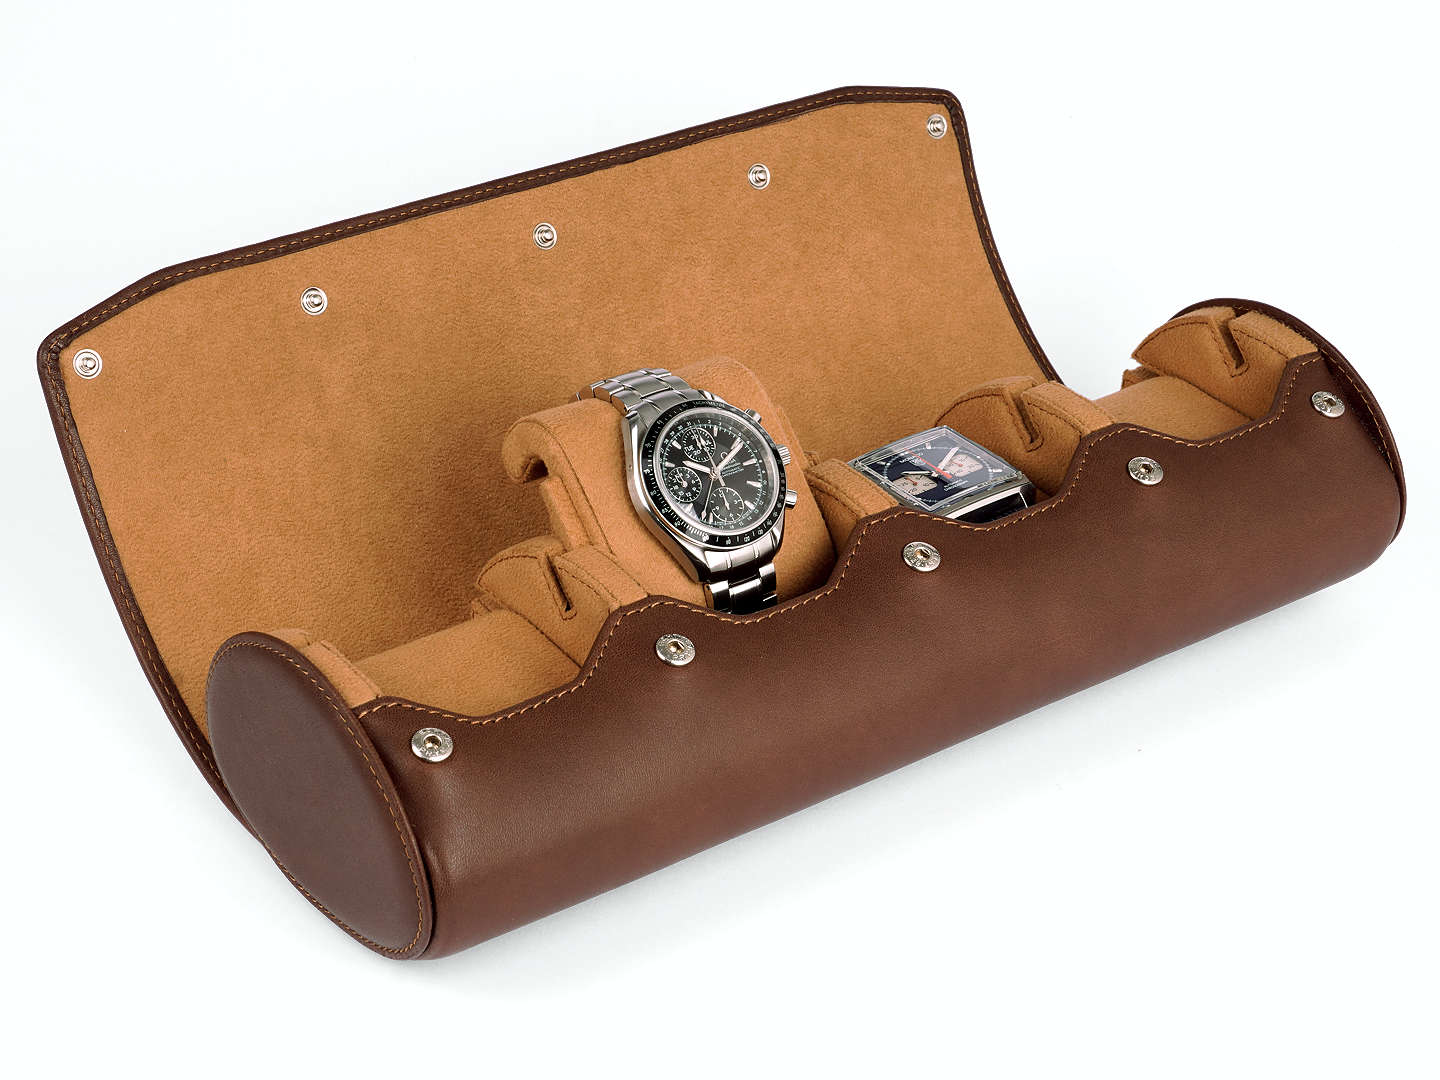 4_Watch_Travel_Watch_Roll_Tobacco_Brown_Leather_open_2_Carapaz